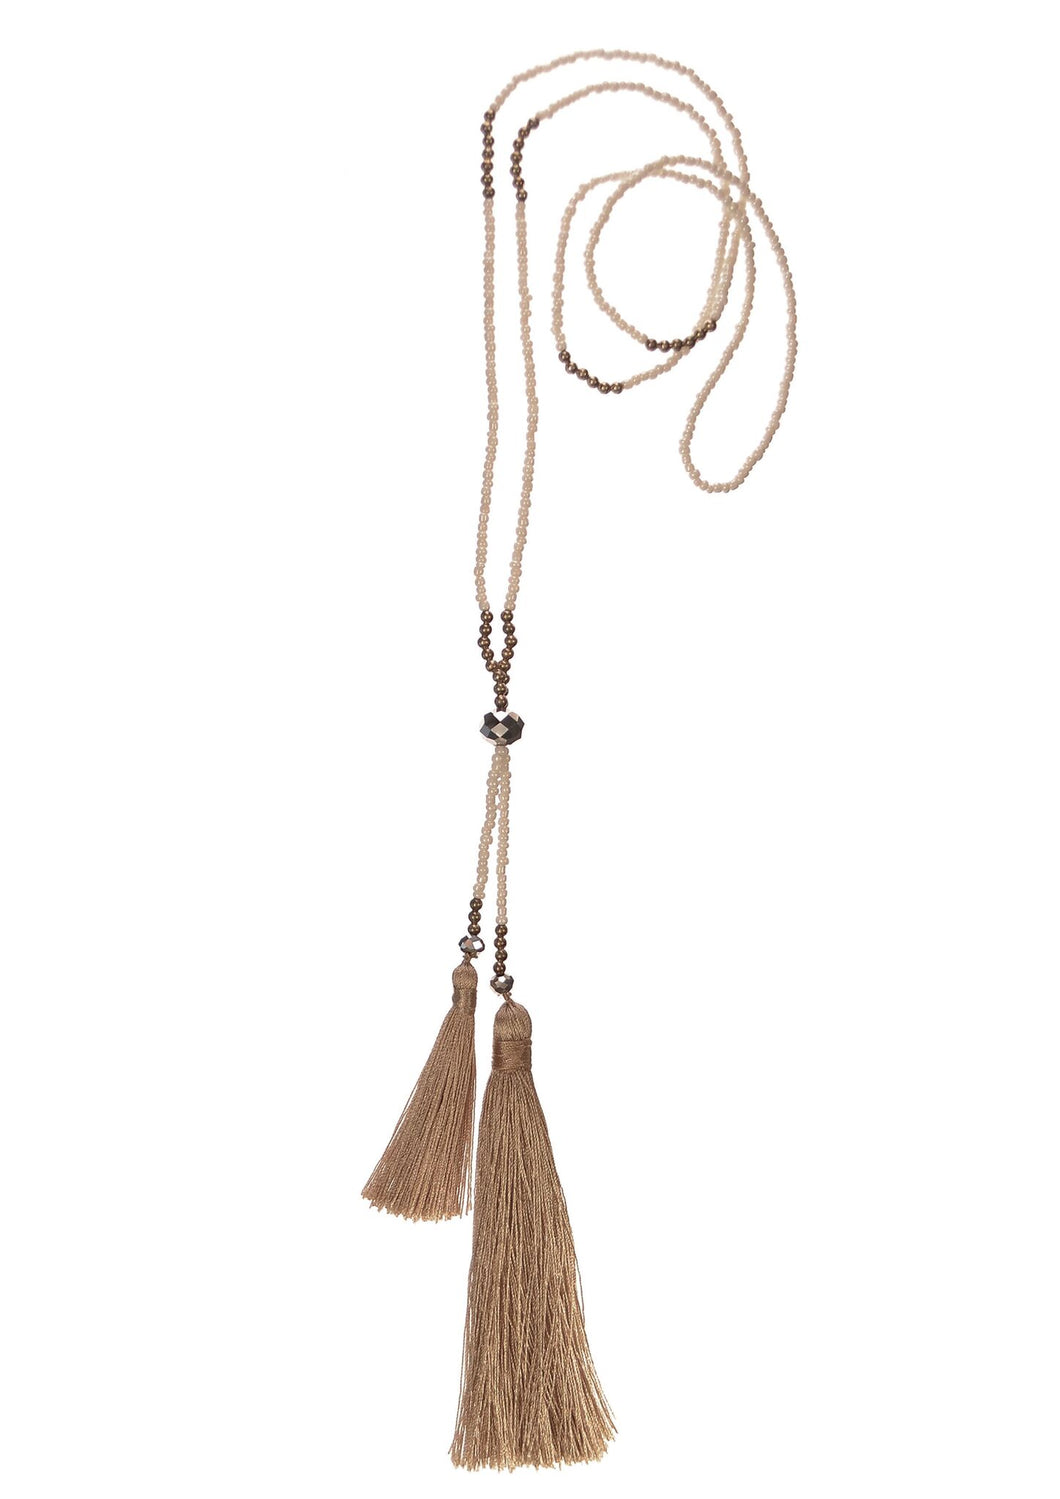 Limited Edition Double-Up Tassel W/Seed Beads - Winter White Pendant - Feathers Of Italy 